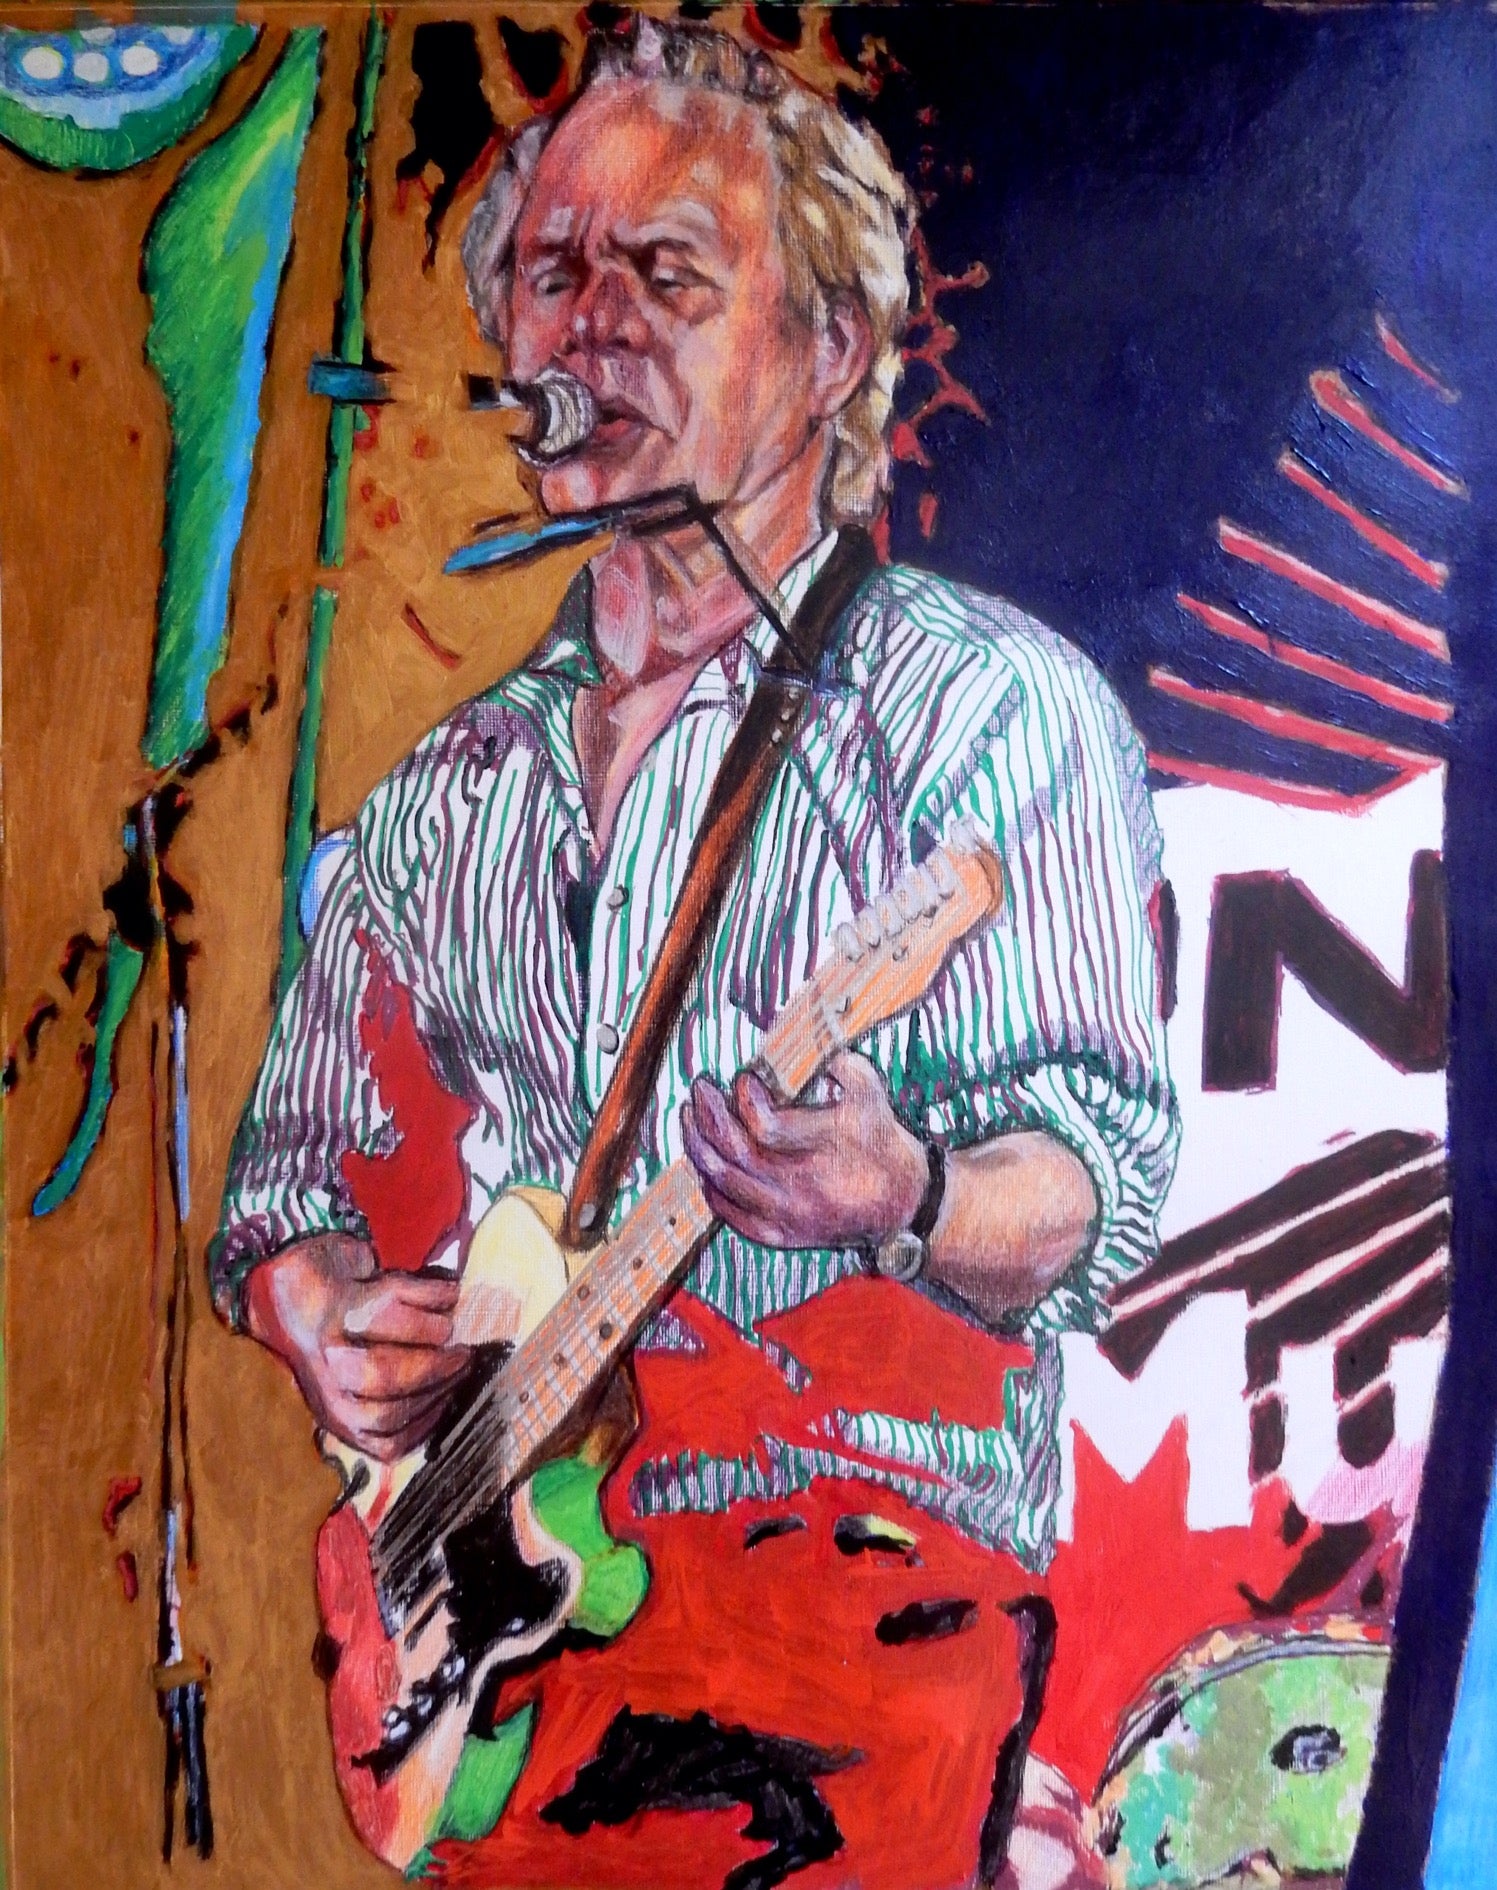 Chris Jagger brother of Mick Jagger mixed media musician art by Stella Tooth